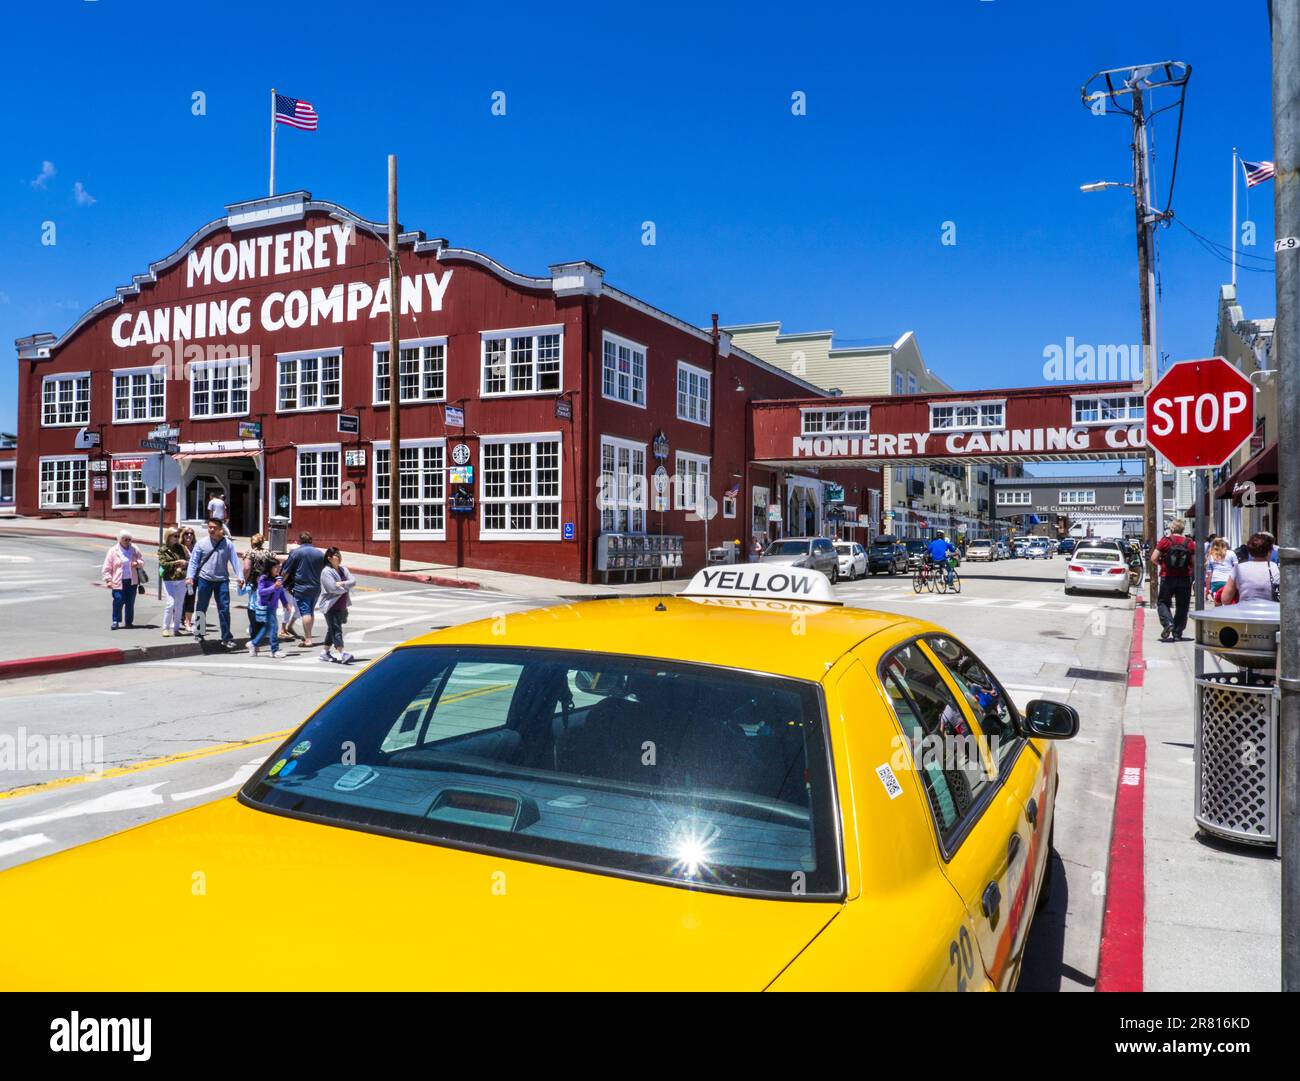 MONTEREY CANNERY ROW Canning Company building with iconic yellow taxi cab in foreground and Stop road sign. Americana. Monterey California USA Stock Photo